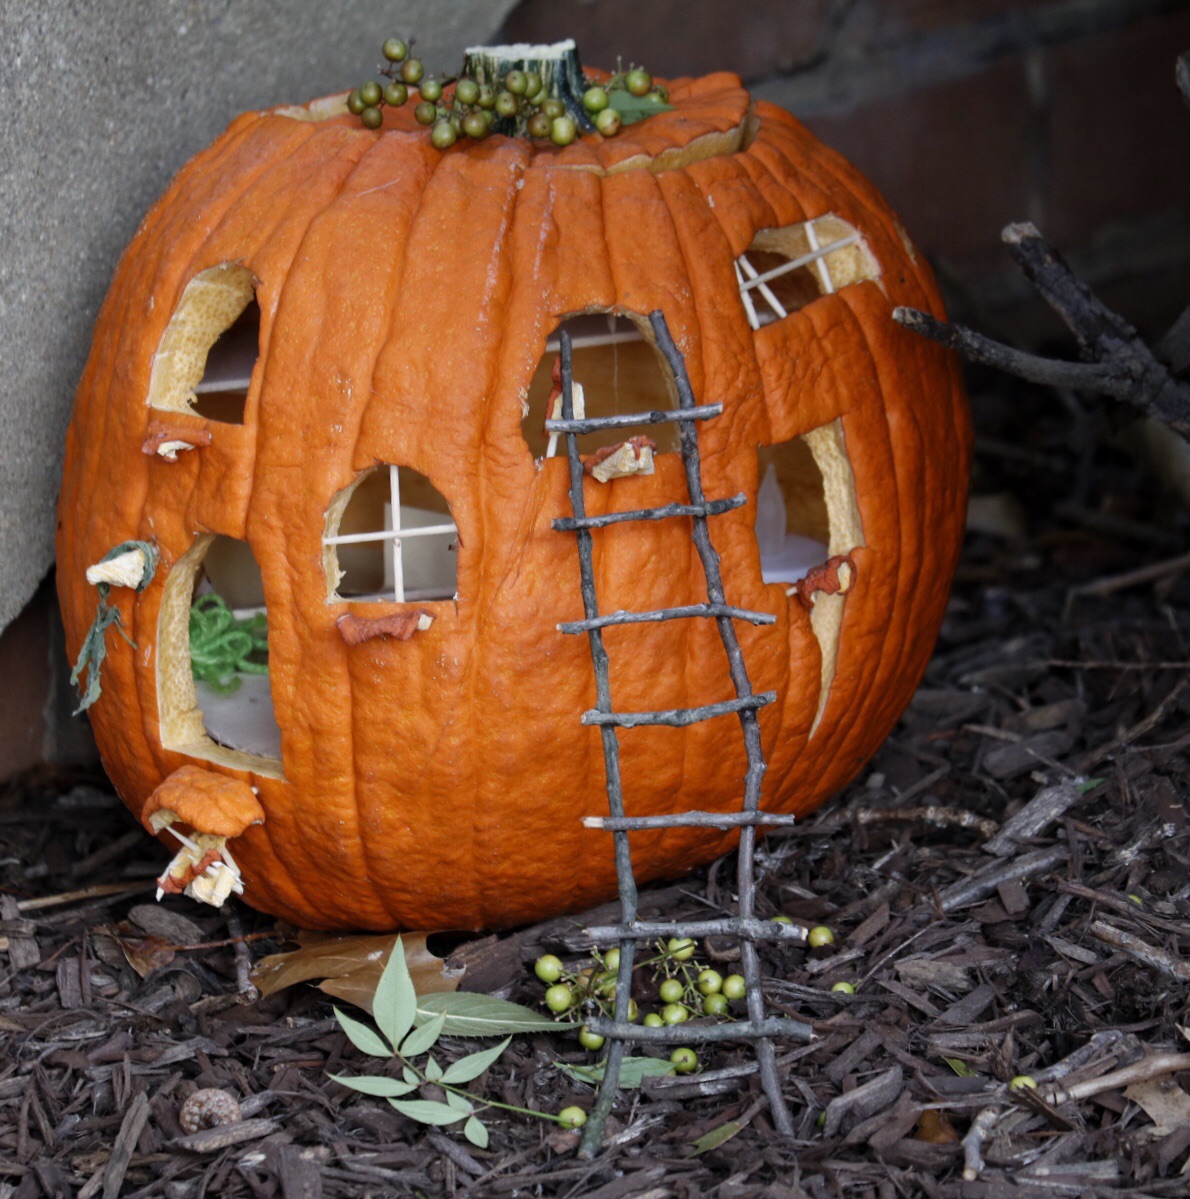 This pumpkin has windows with miniature panes made of toothpicks. Small ledges protrude from the windows and there’s a teeny tiny ladder made out of twigs leaning up against one of the windows. (WTOP/Kate Ryan)